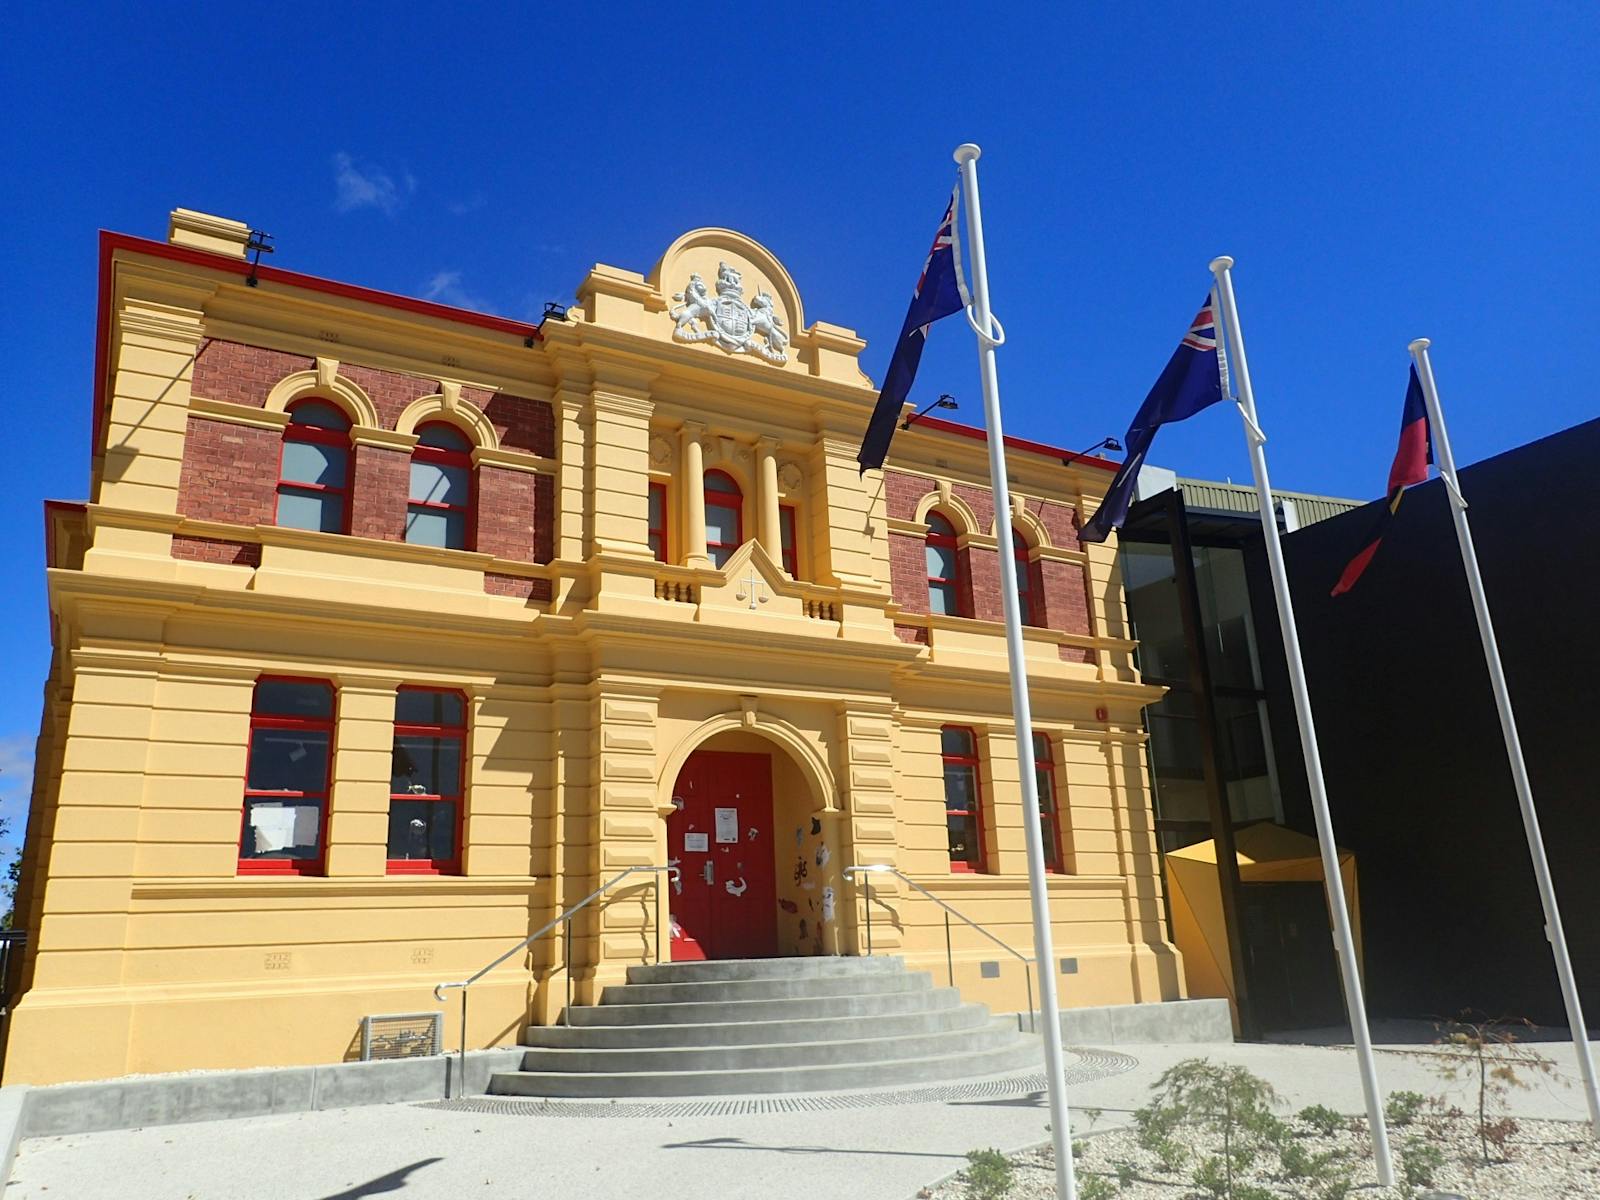 External view of the Gallery, located within the old Devonport Courthouse